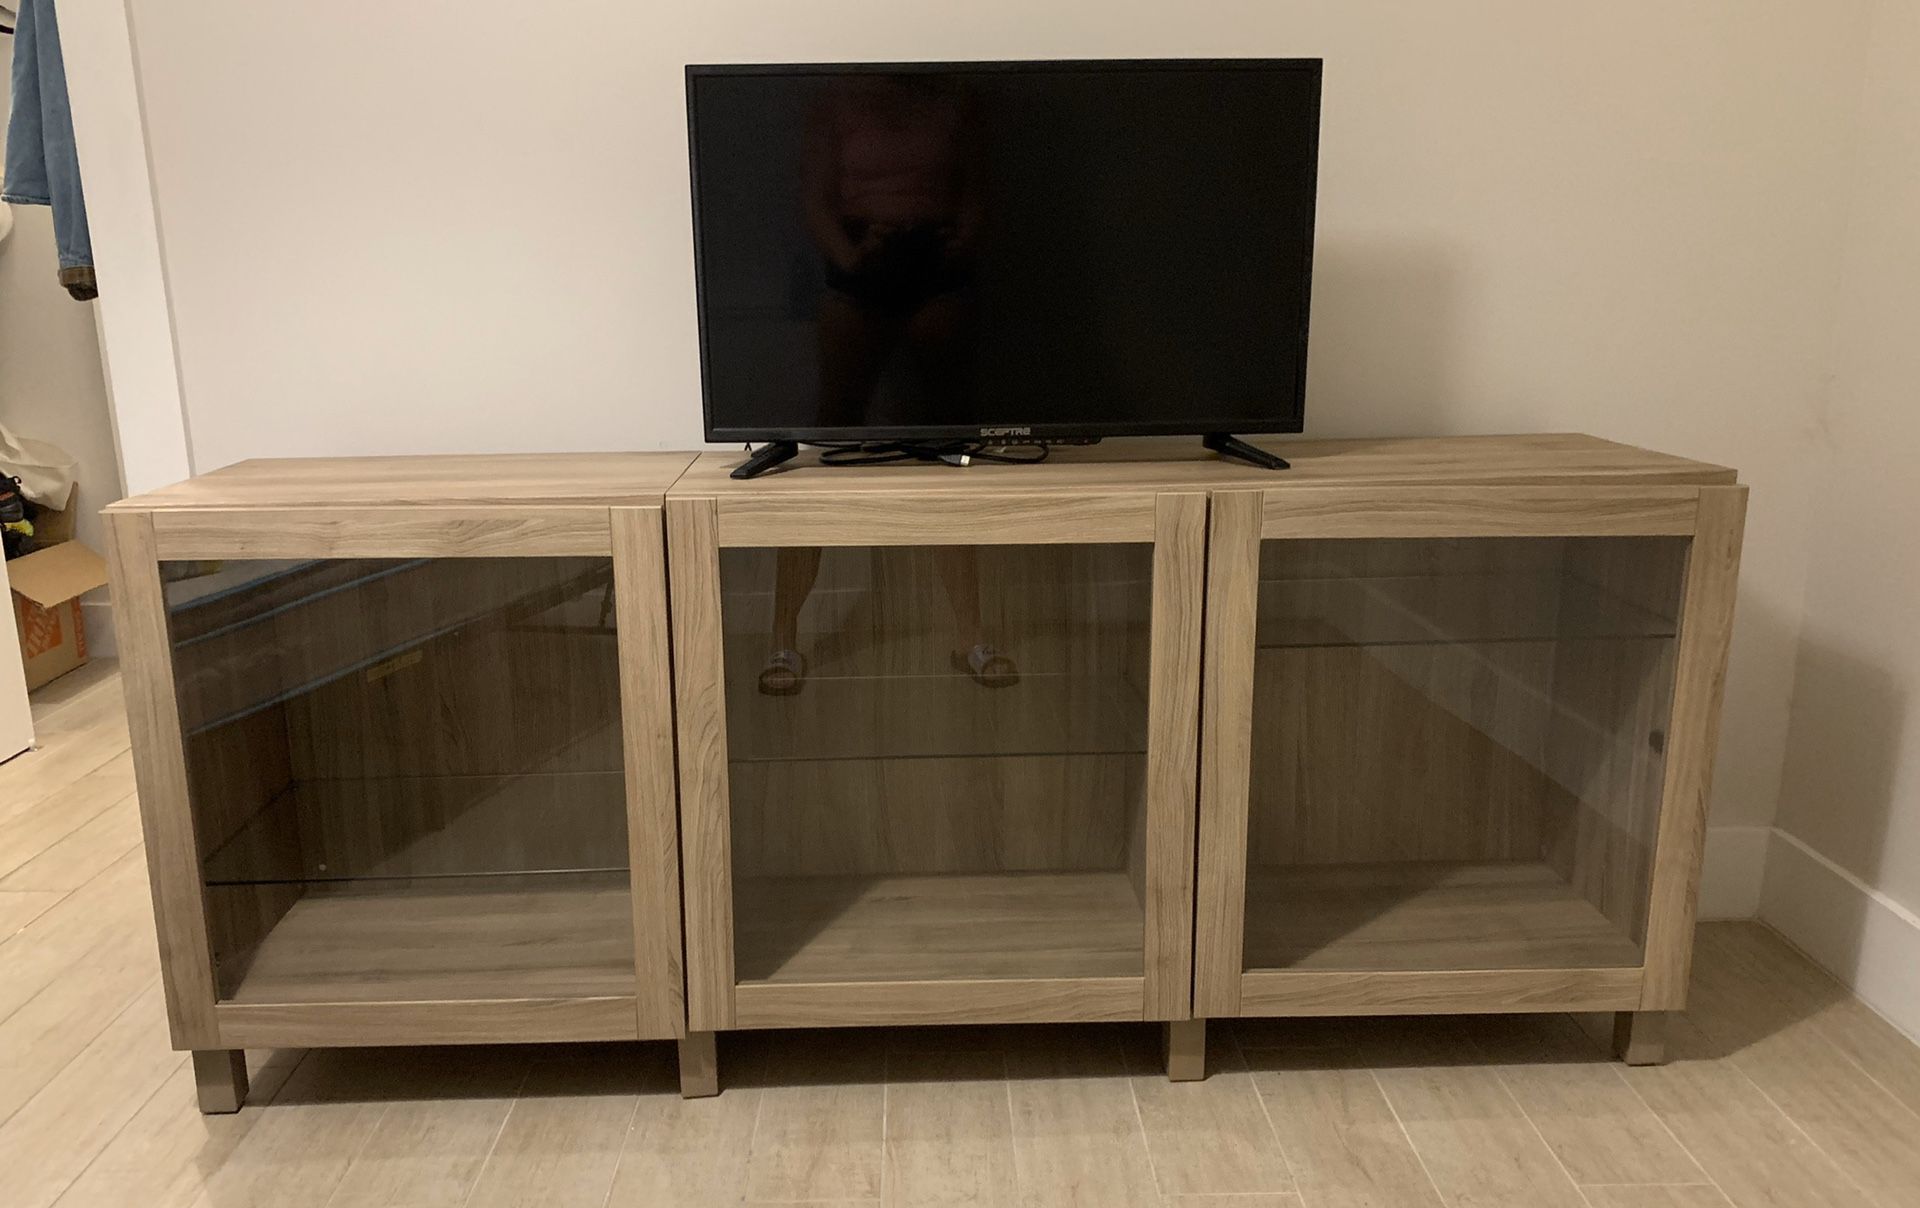 Brand new multipurpose Tv stand with 3 different compartments for storage